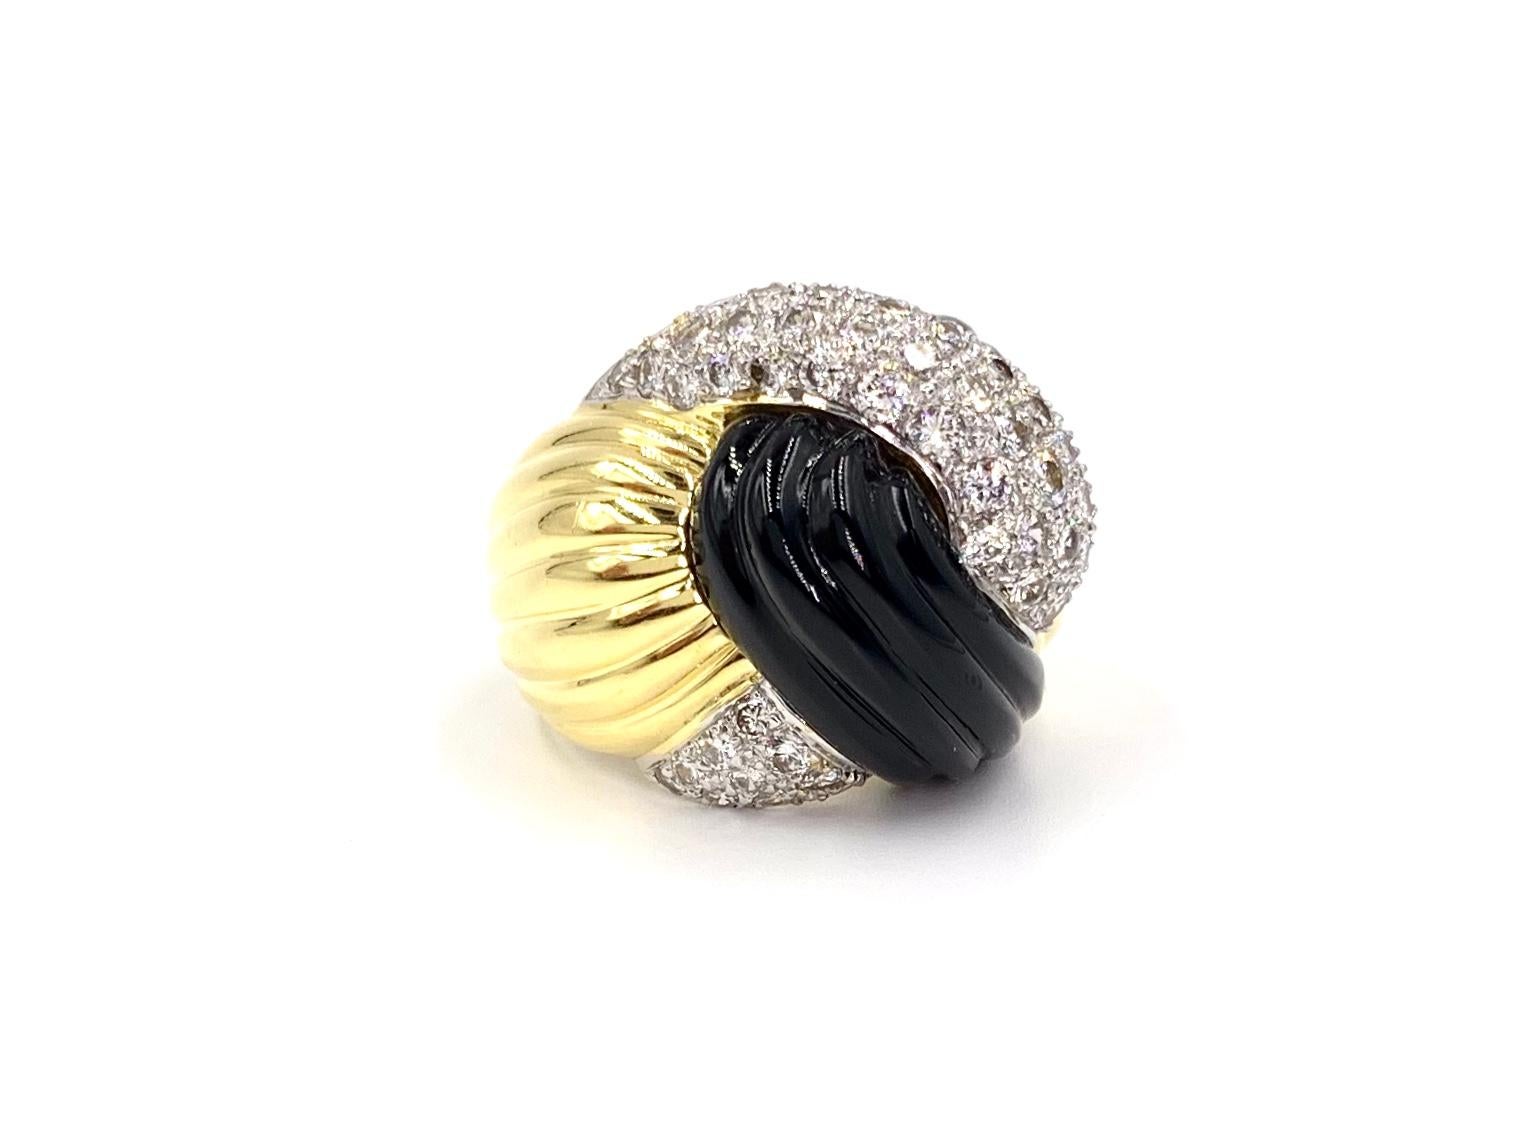 A well made and substantial 18 karat yellow gold modern ring featuring carved smooth black onyx and 1.72 carats of white round brilliant pavé set diamonds. Diamonds are approximately F-G color, VS2 clarity (eye clean) and are set in white gold for